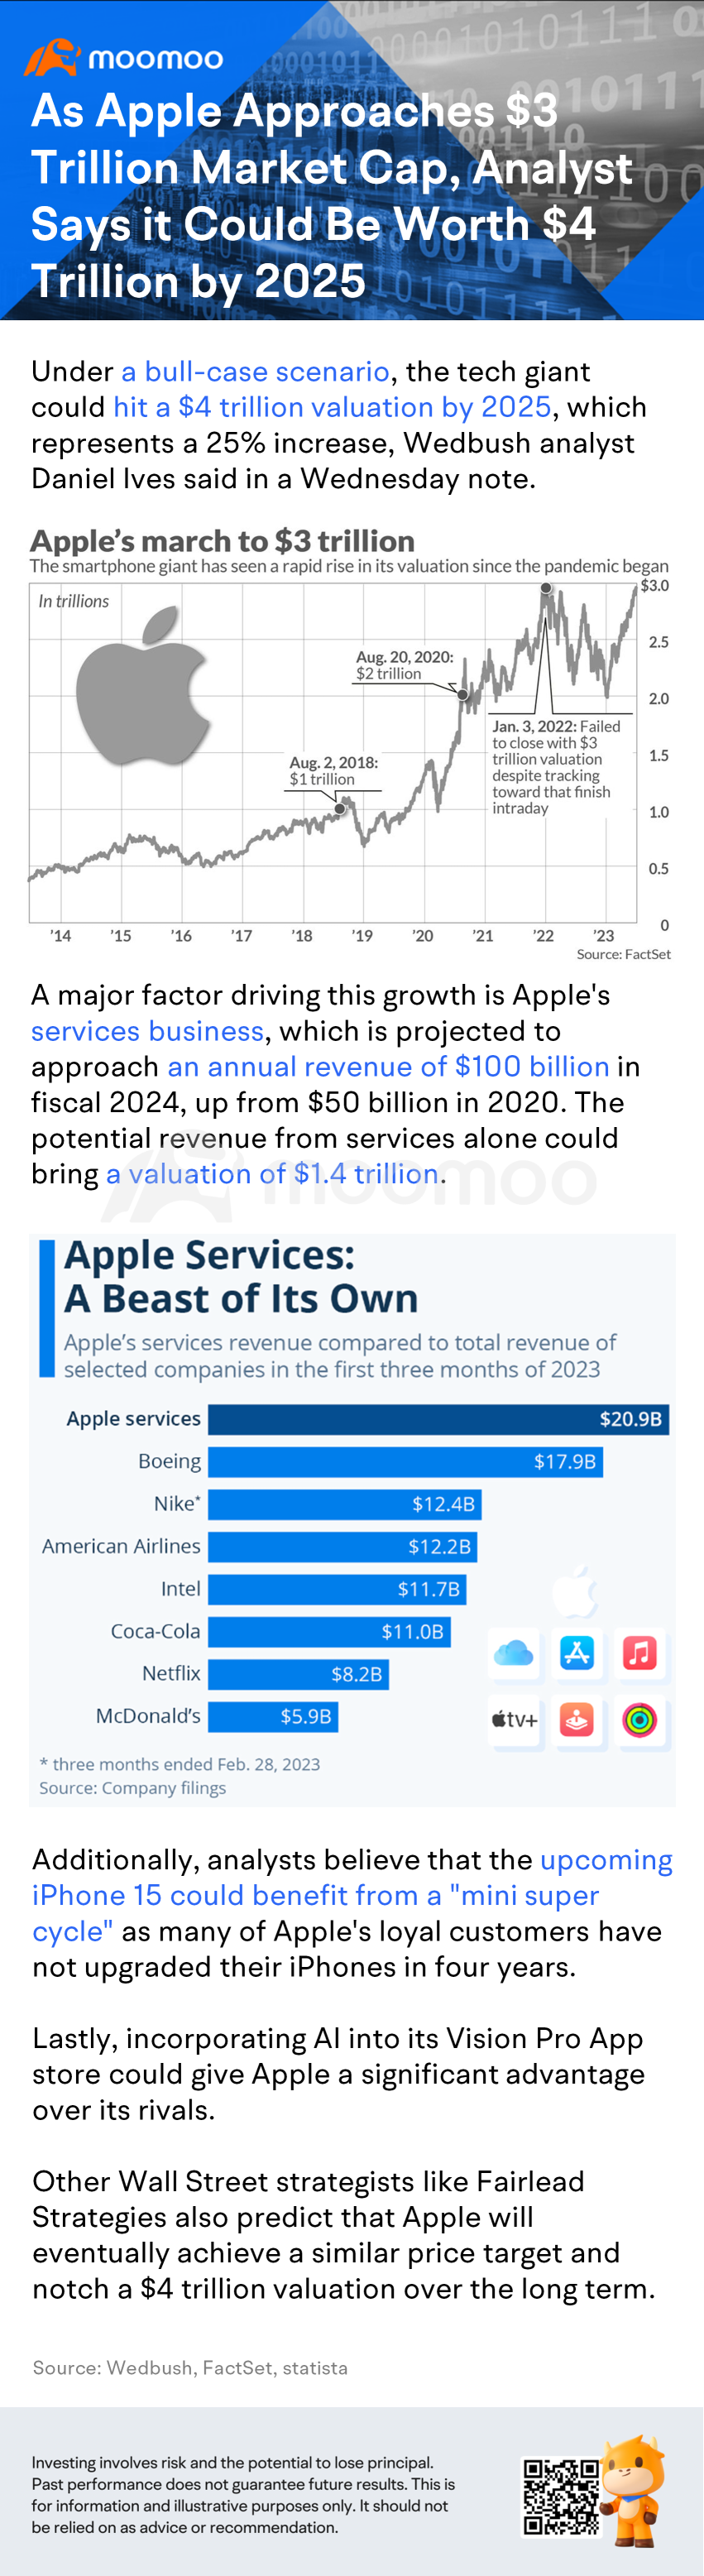 As Apple Approaches $3 Trillion Market Cap, Analyst Says it Could Be Worth $4 Trillion by 2025